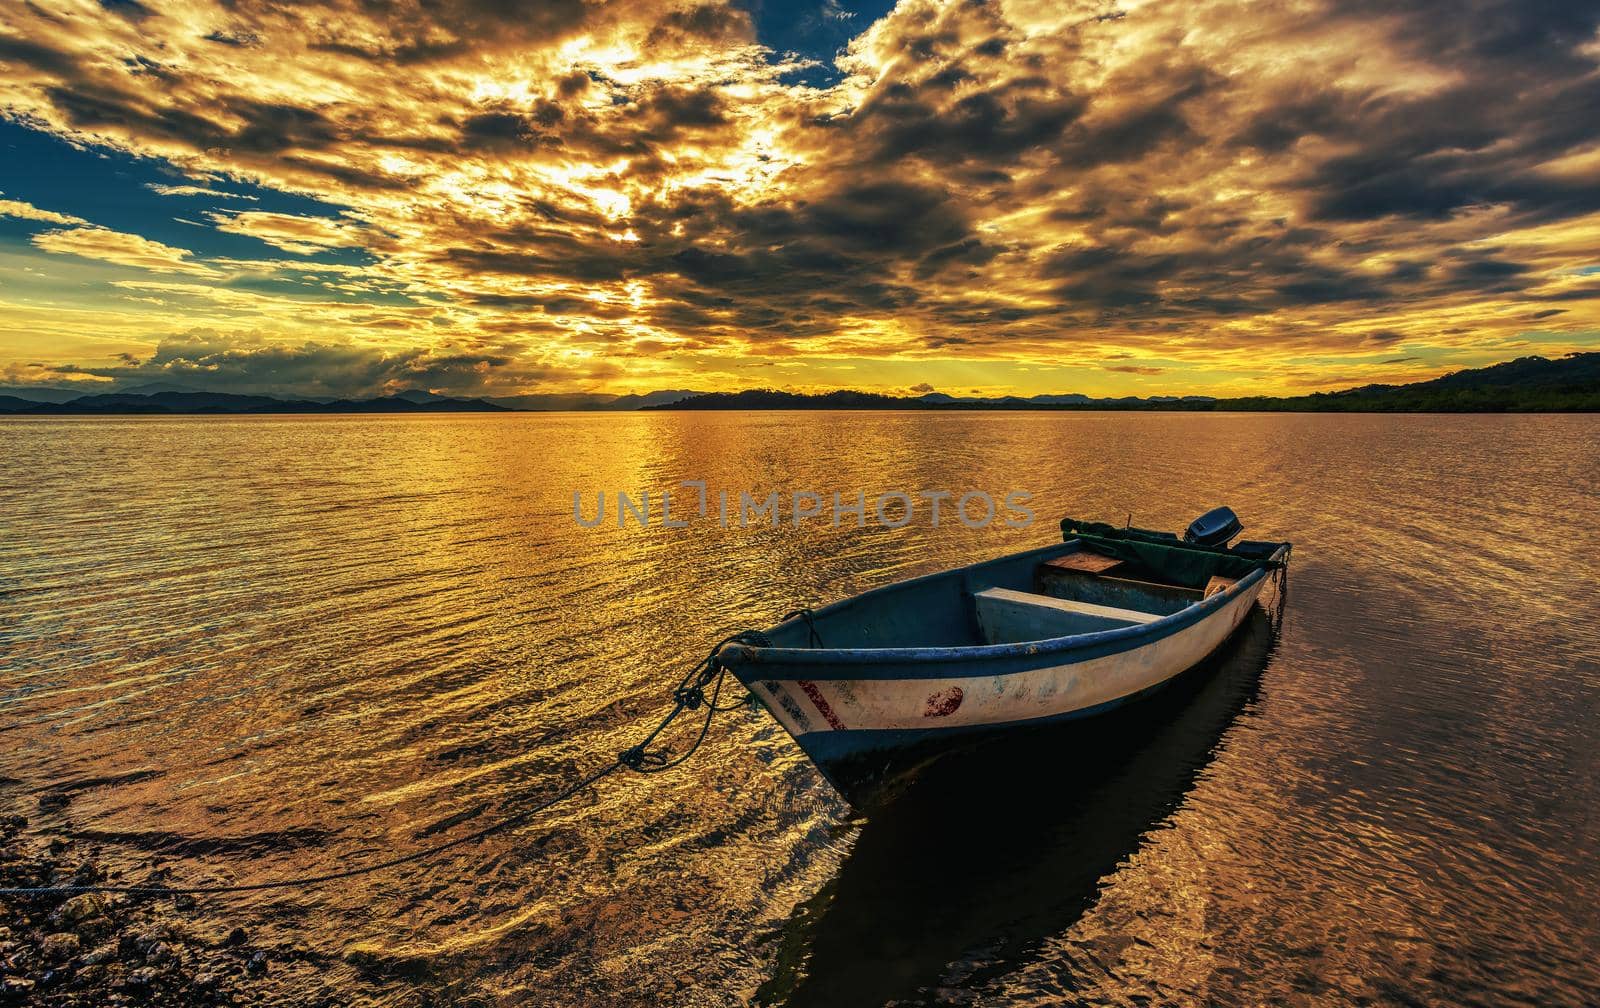 Idyllic evening view of the Pacific Coast in Muelle Conchal with boat in front against dramatic clouds. Idyllic sunset landscape. Colorado, Costa Rica. Pura Vida concept, travel to exotic tropical country.